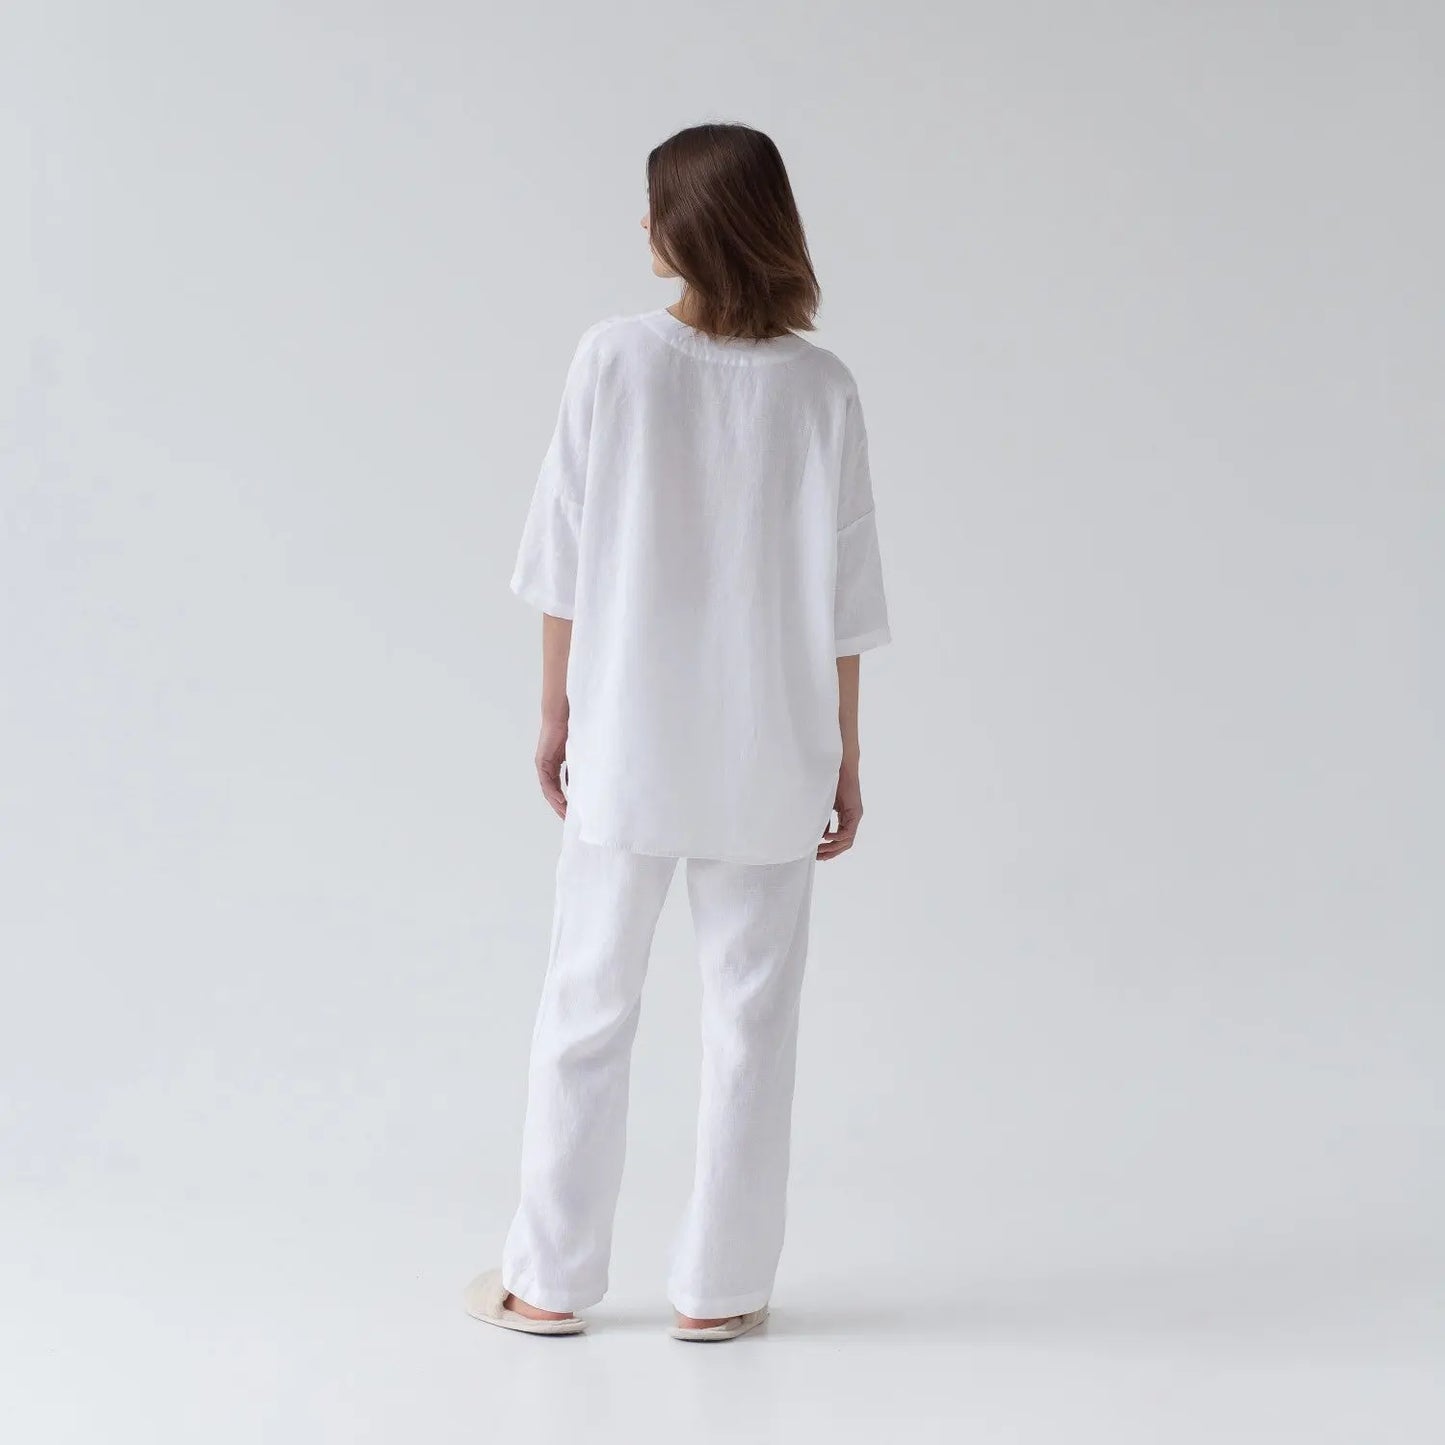 A woman in white linen Primrose loungewear set, featuring a V-neck shirt with 3/4-length sleeves and buttoned front closure, paired with relaxed-fit trousers and an elastic waistband.